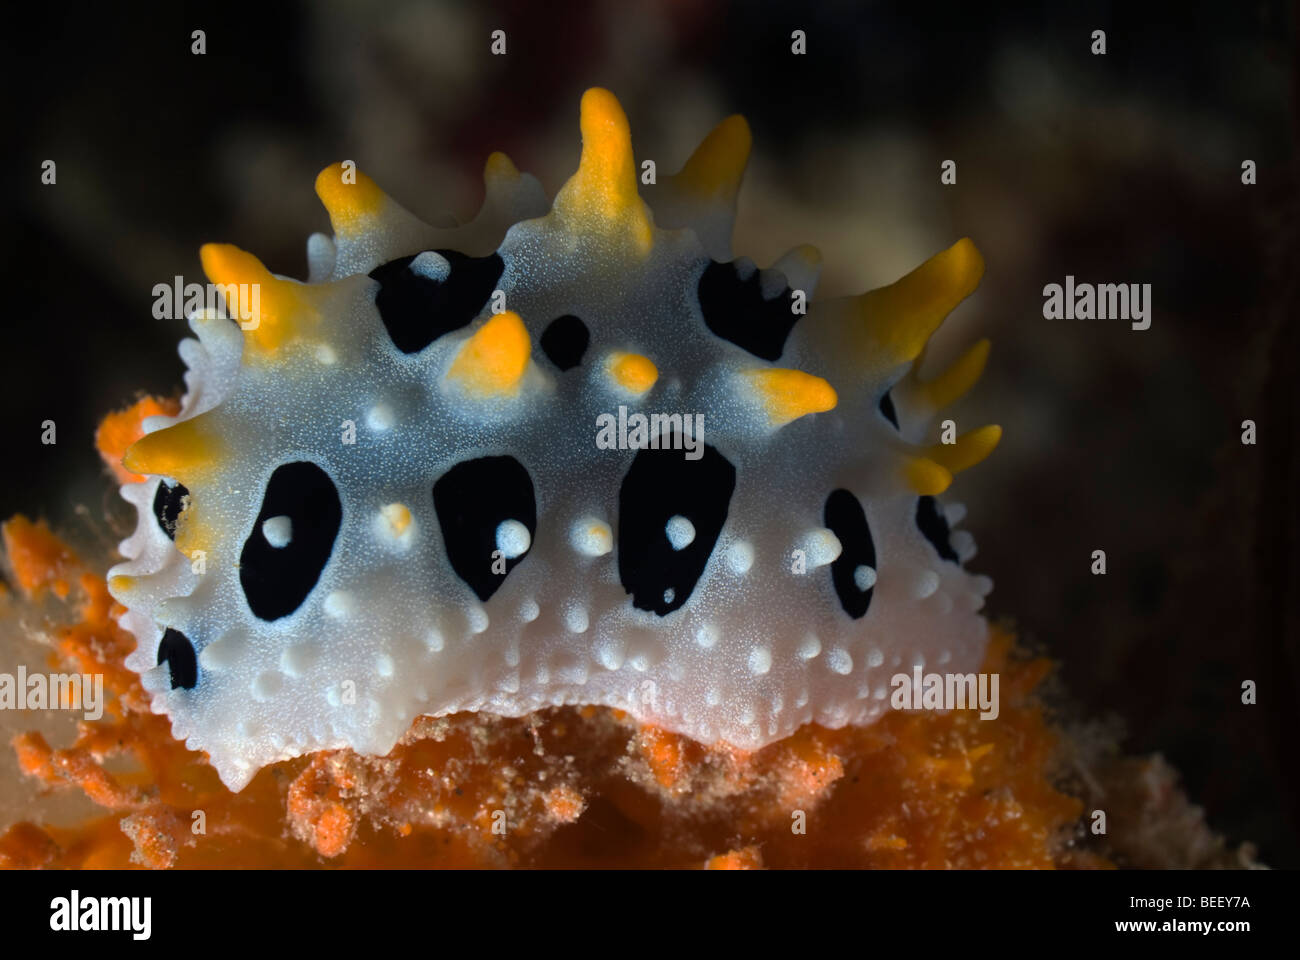 White nudibranch with big black dots and yellow warts under water. Stock Photo